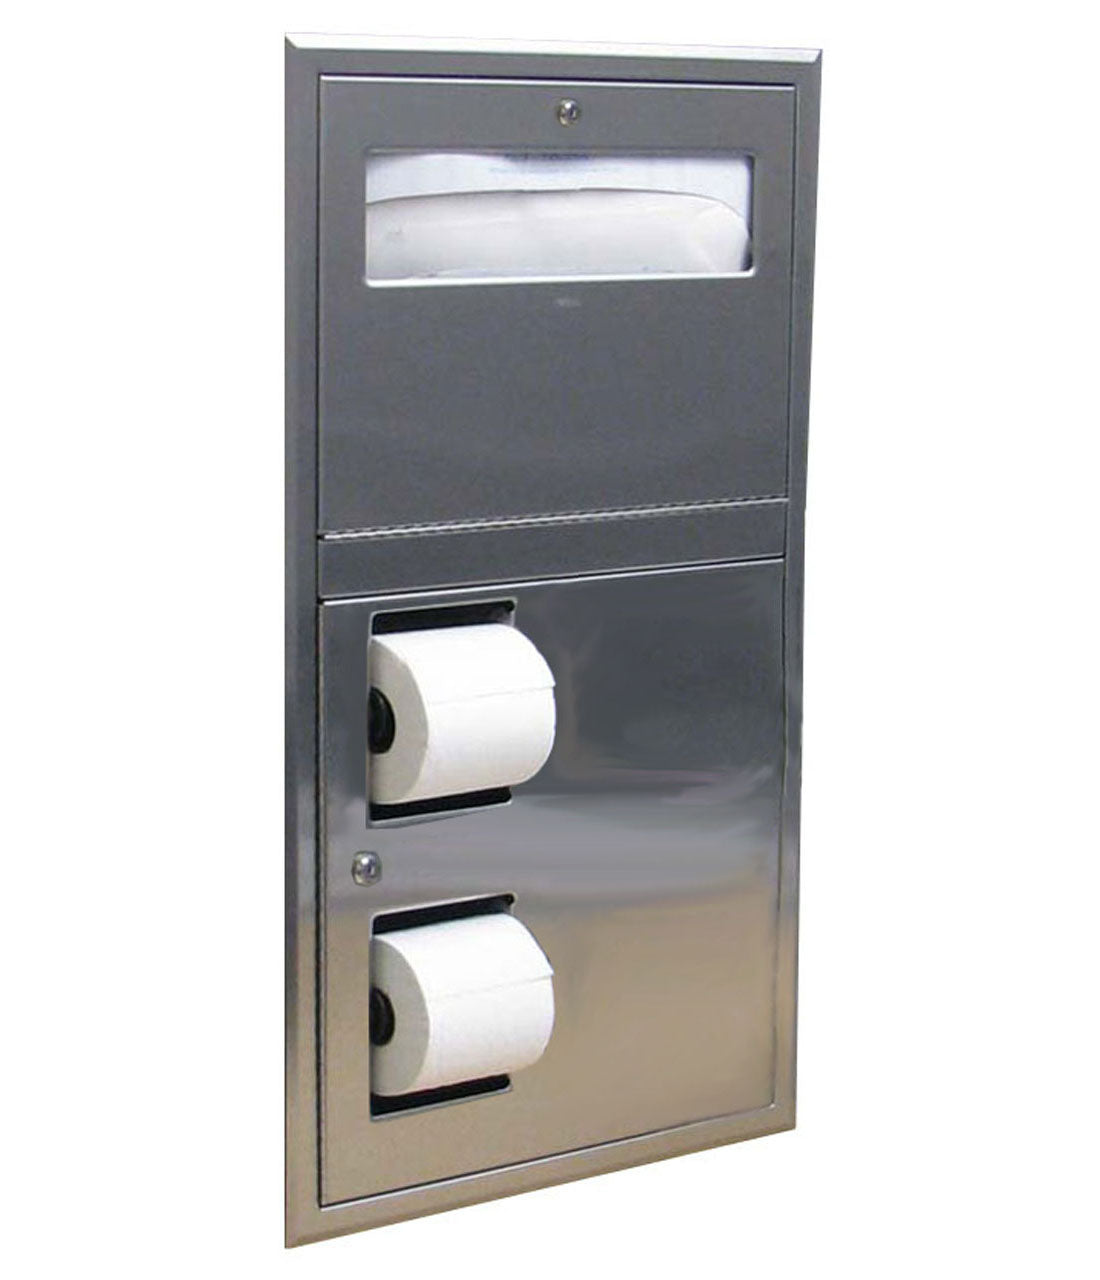 The Bobrick B-34745 is a recessed toilet seat and double roll paper dispenser in stainless steel.